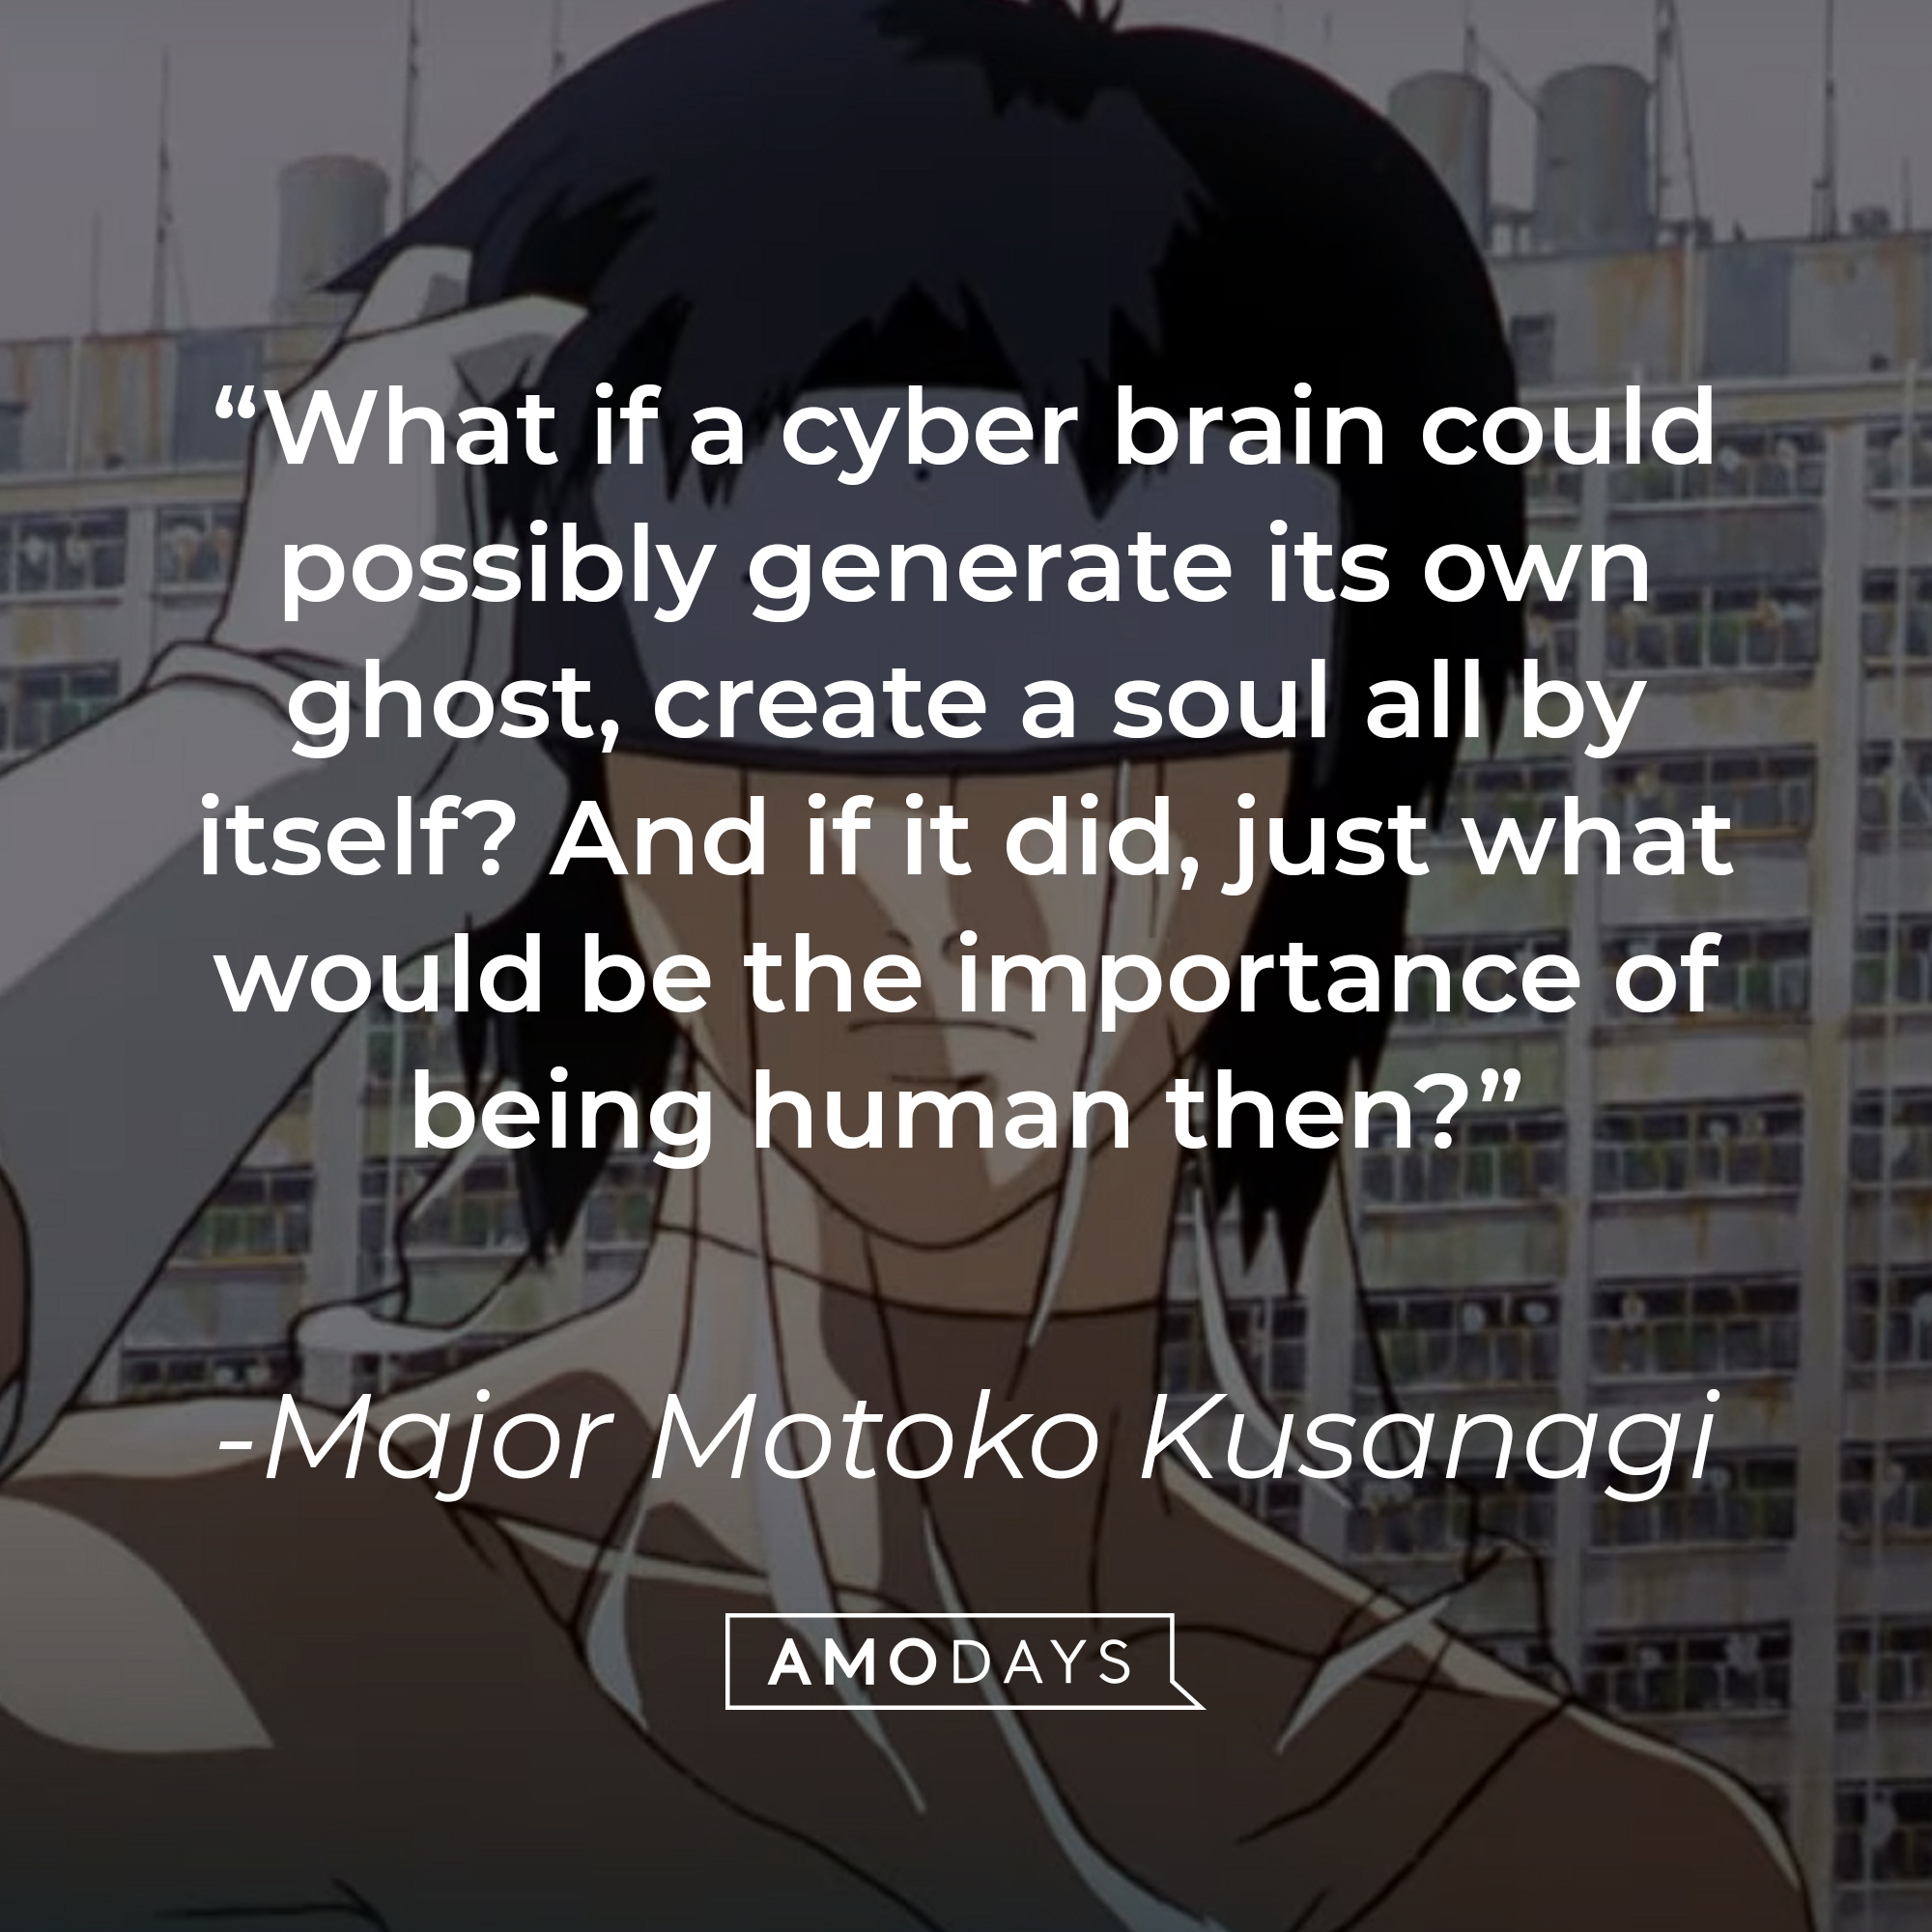 Major Motoko Kusanagi with her quote: "What if a cyber brain could possibly generate its own ghost, create a soul all by itself? And if it did, just what would be the importance of being human then?" | Source: YouTube.com/LionsgateMovies